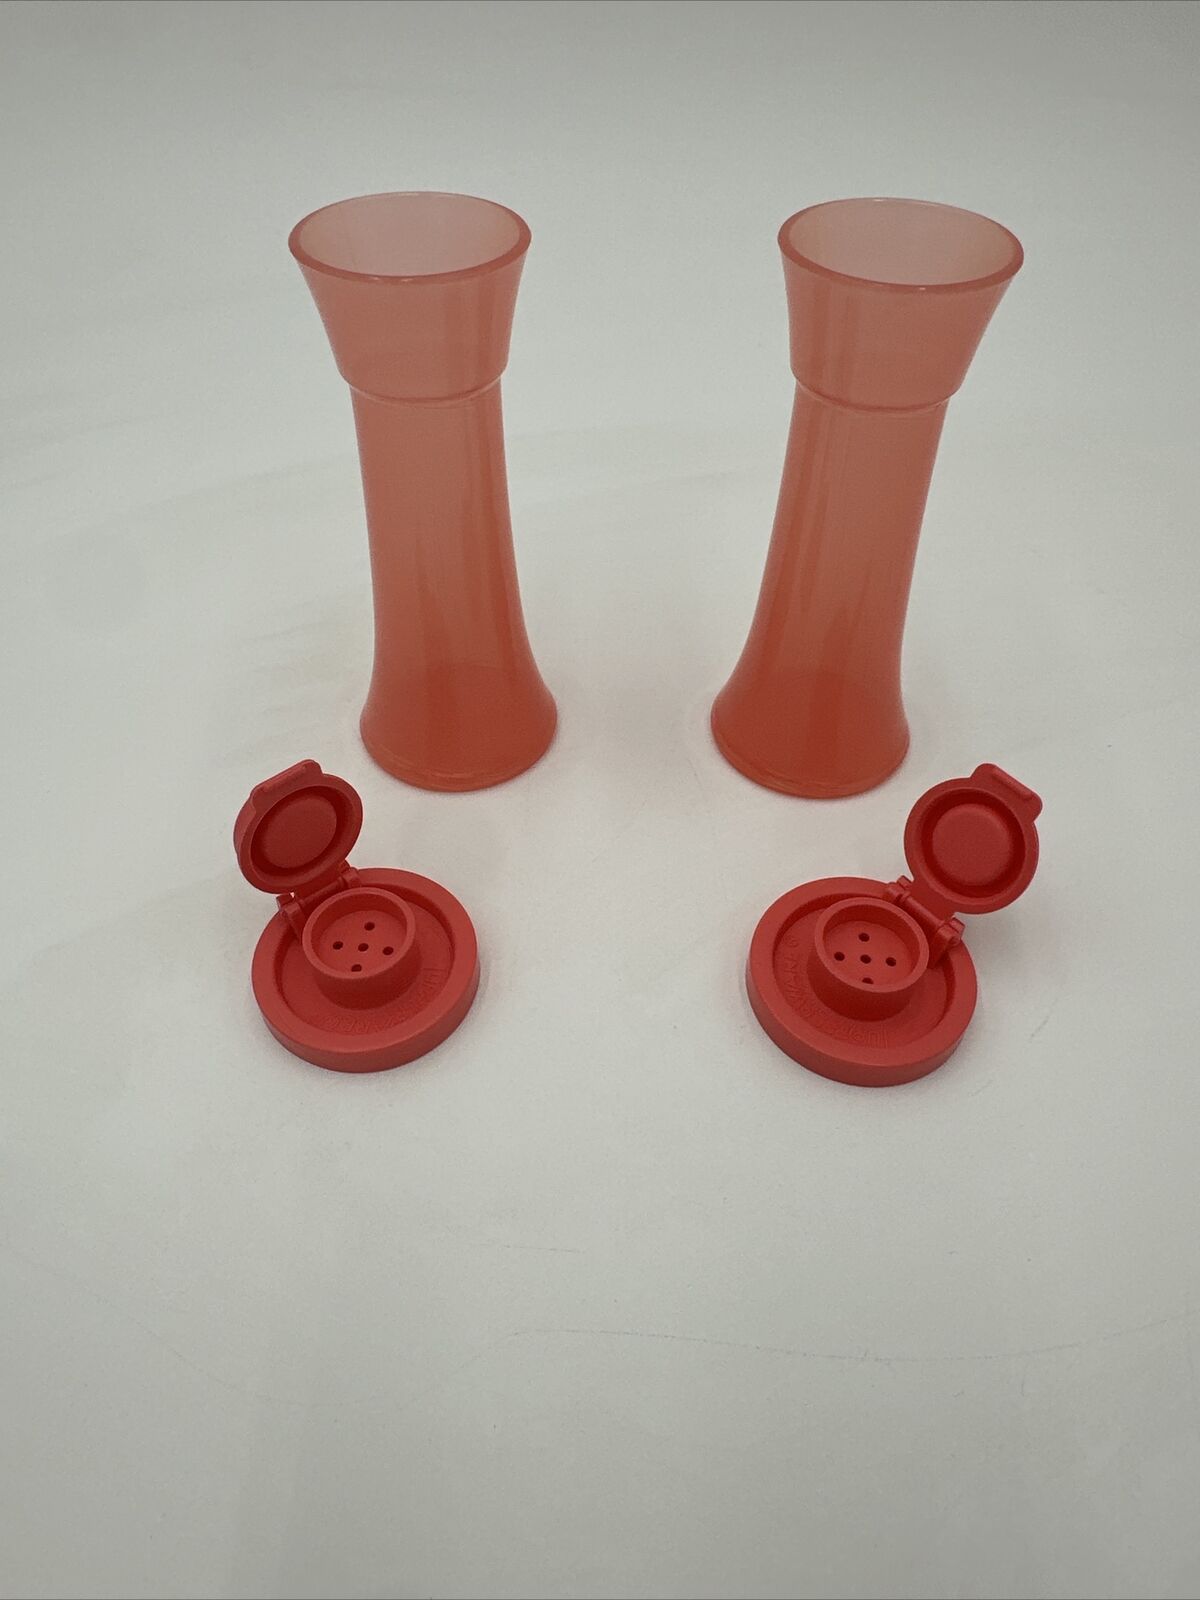 Tupperware Small 4” Hourglass Salt and Pepper Shakers Mini Guava Color Sale